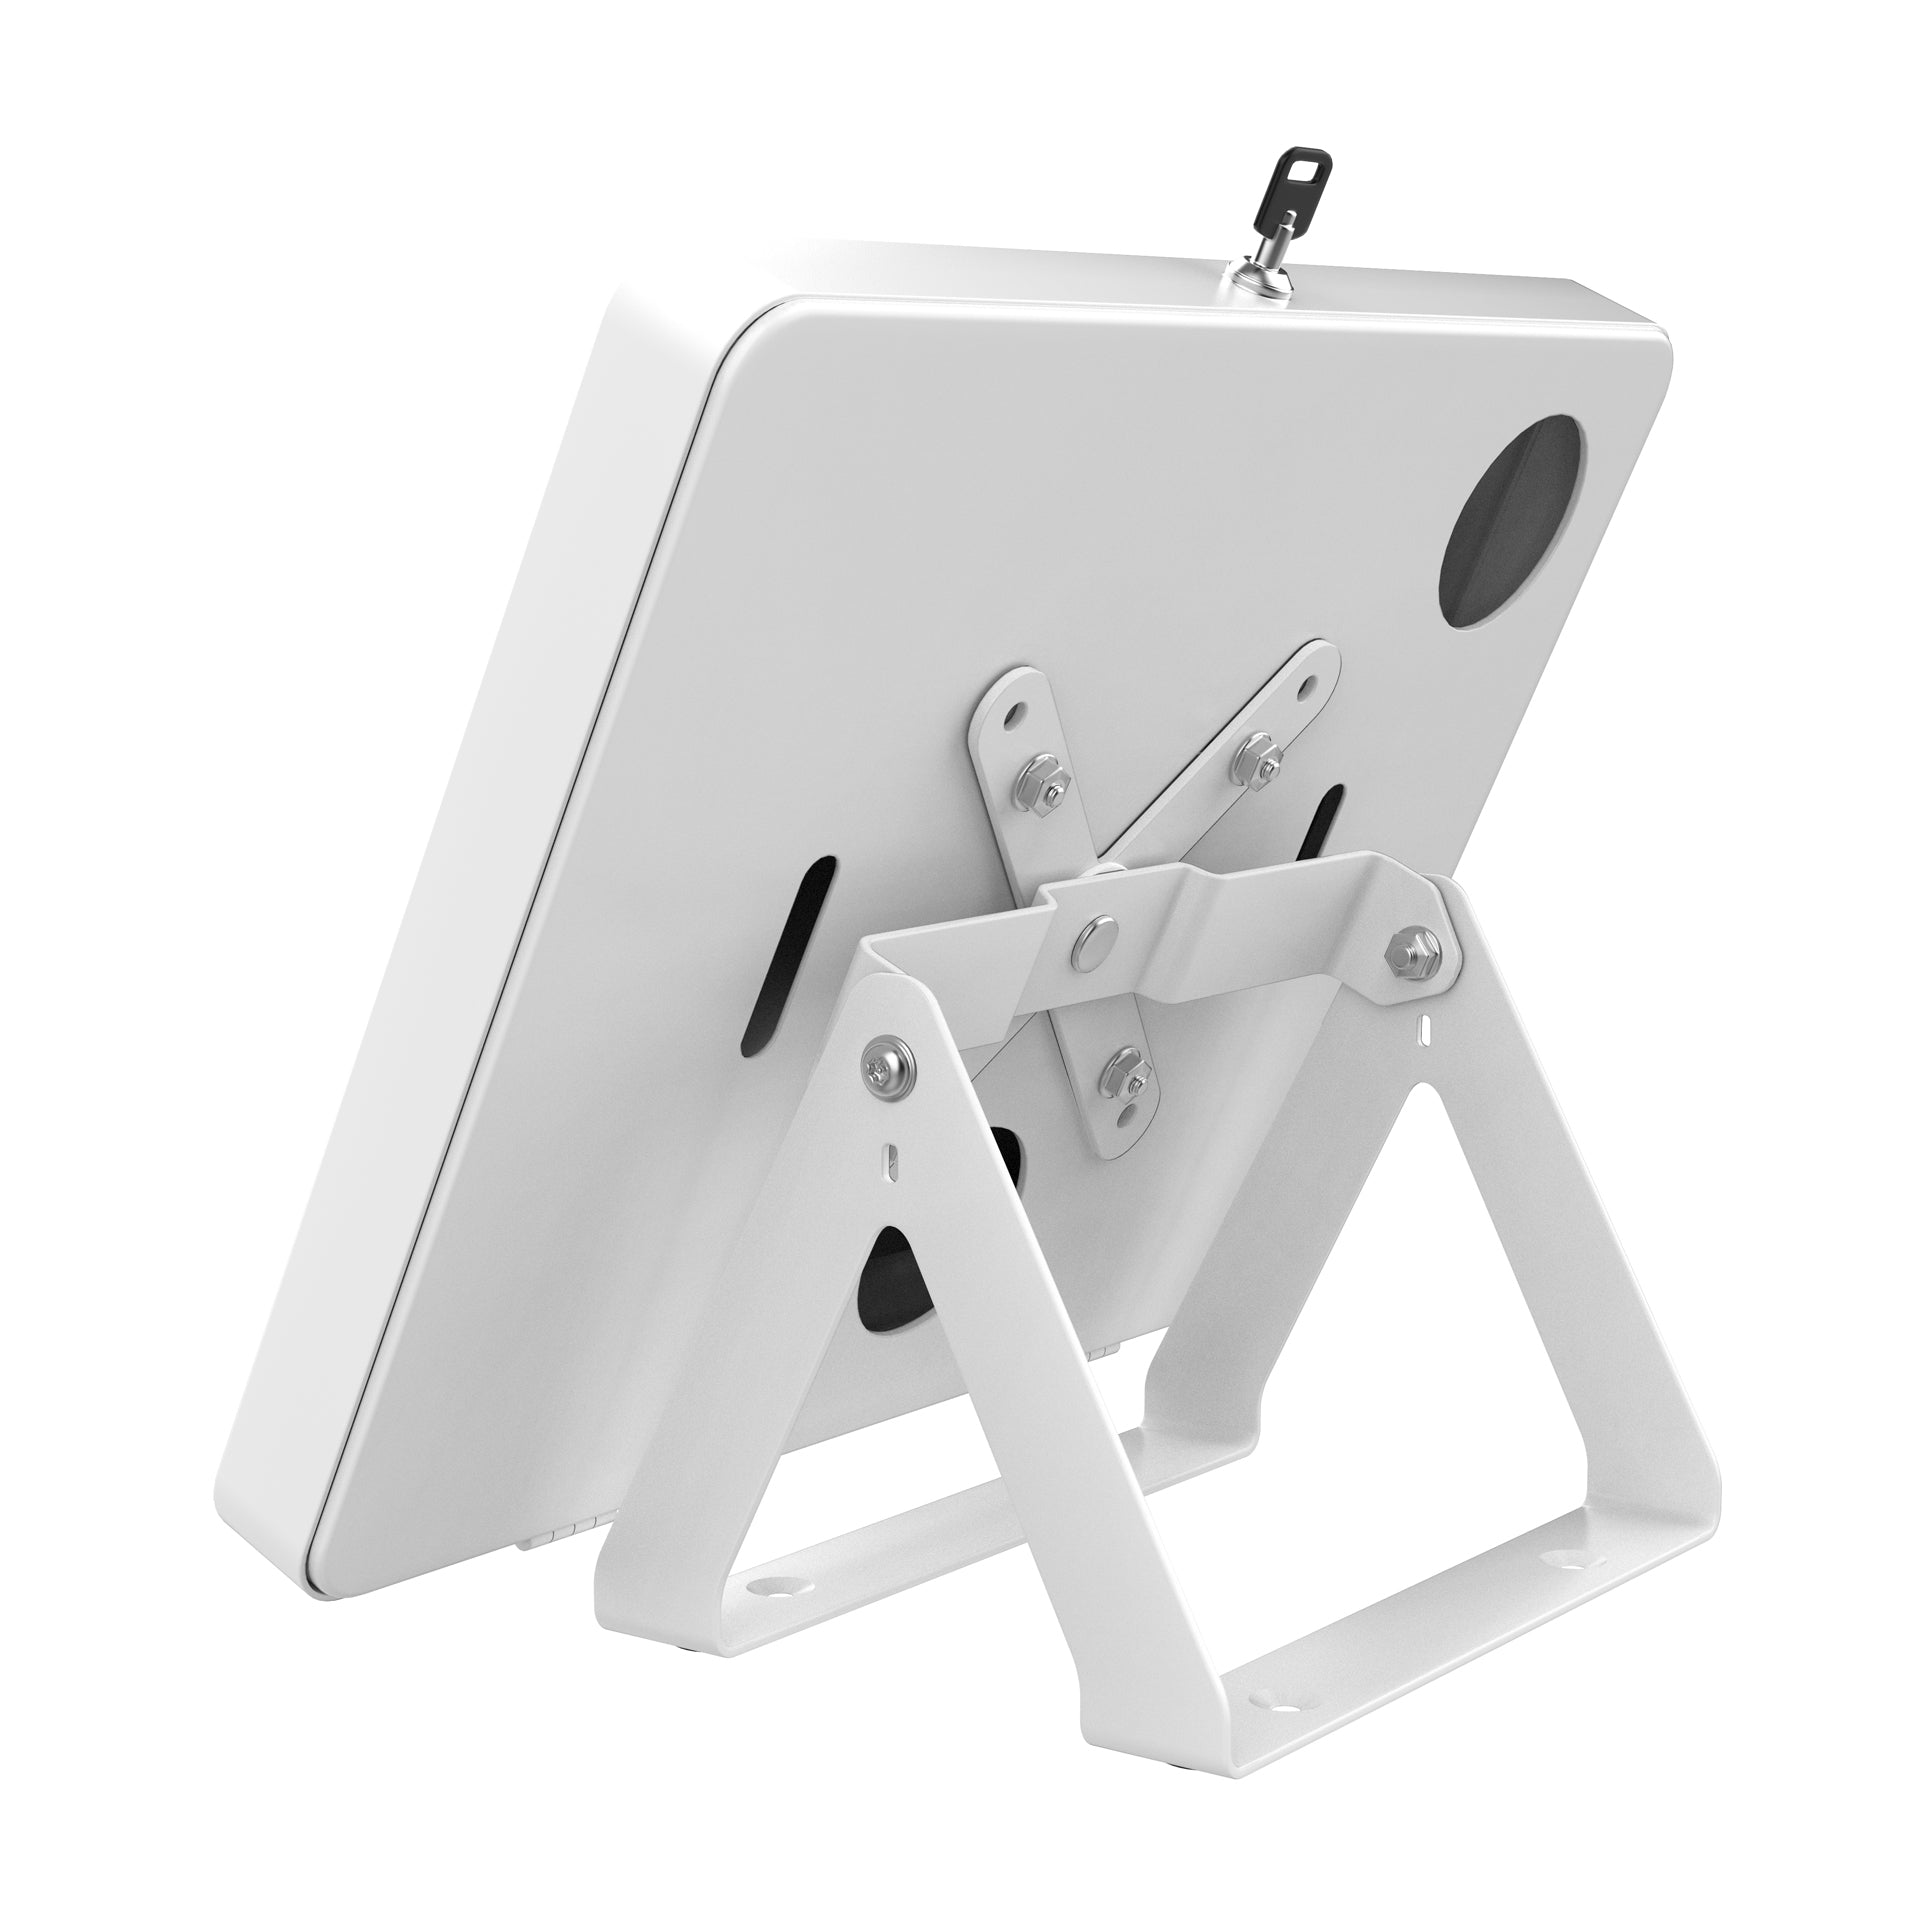 Full Rotation Desk Mount w/ Security Enclosure for 7 - 11 inch Tablets, Including iPad Air 11 inch - M2 (2024), iPad Pro 11 inch - M4 (2024) & more